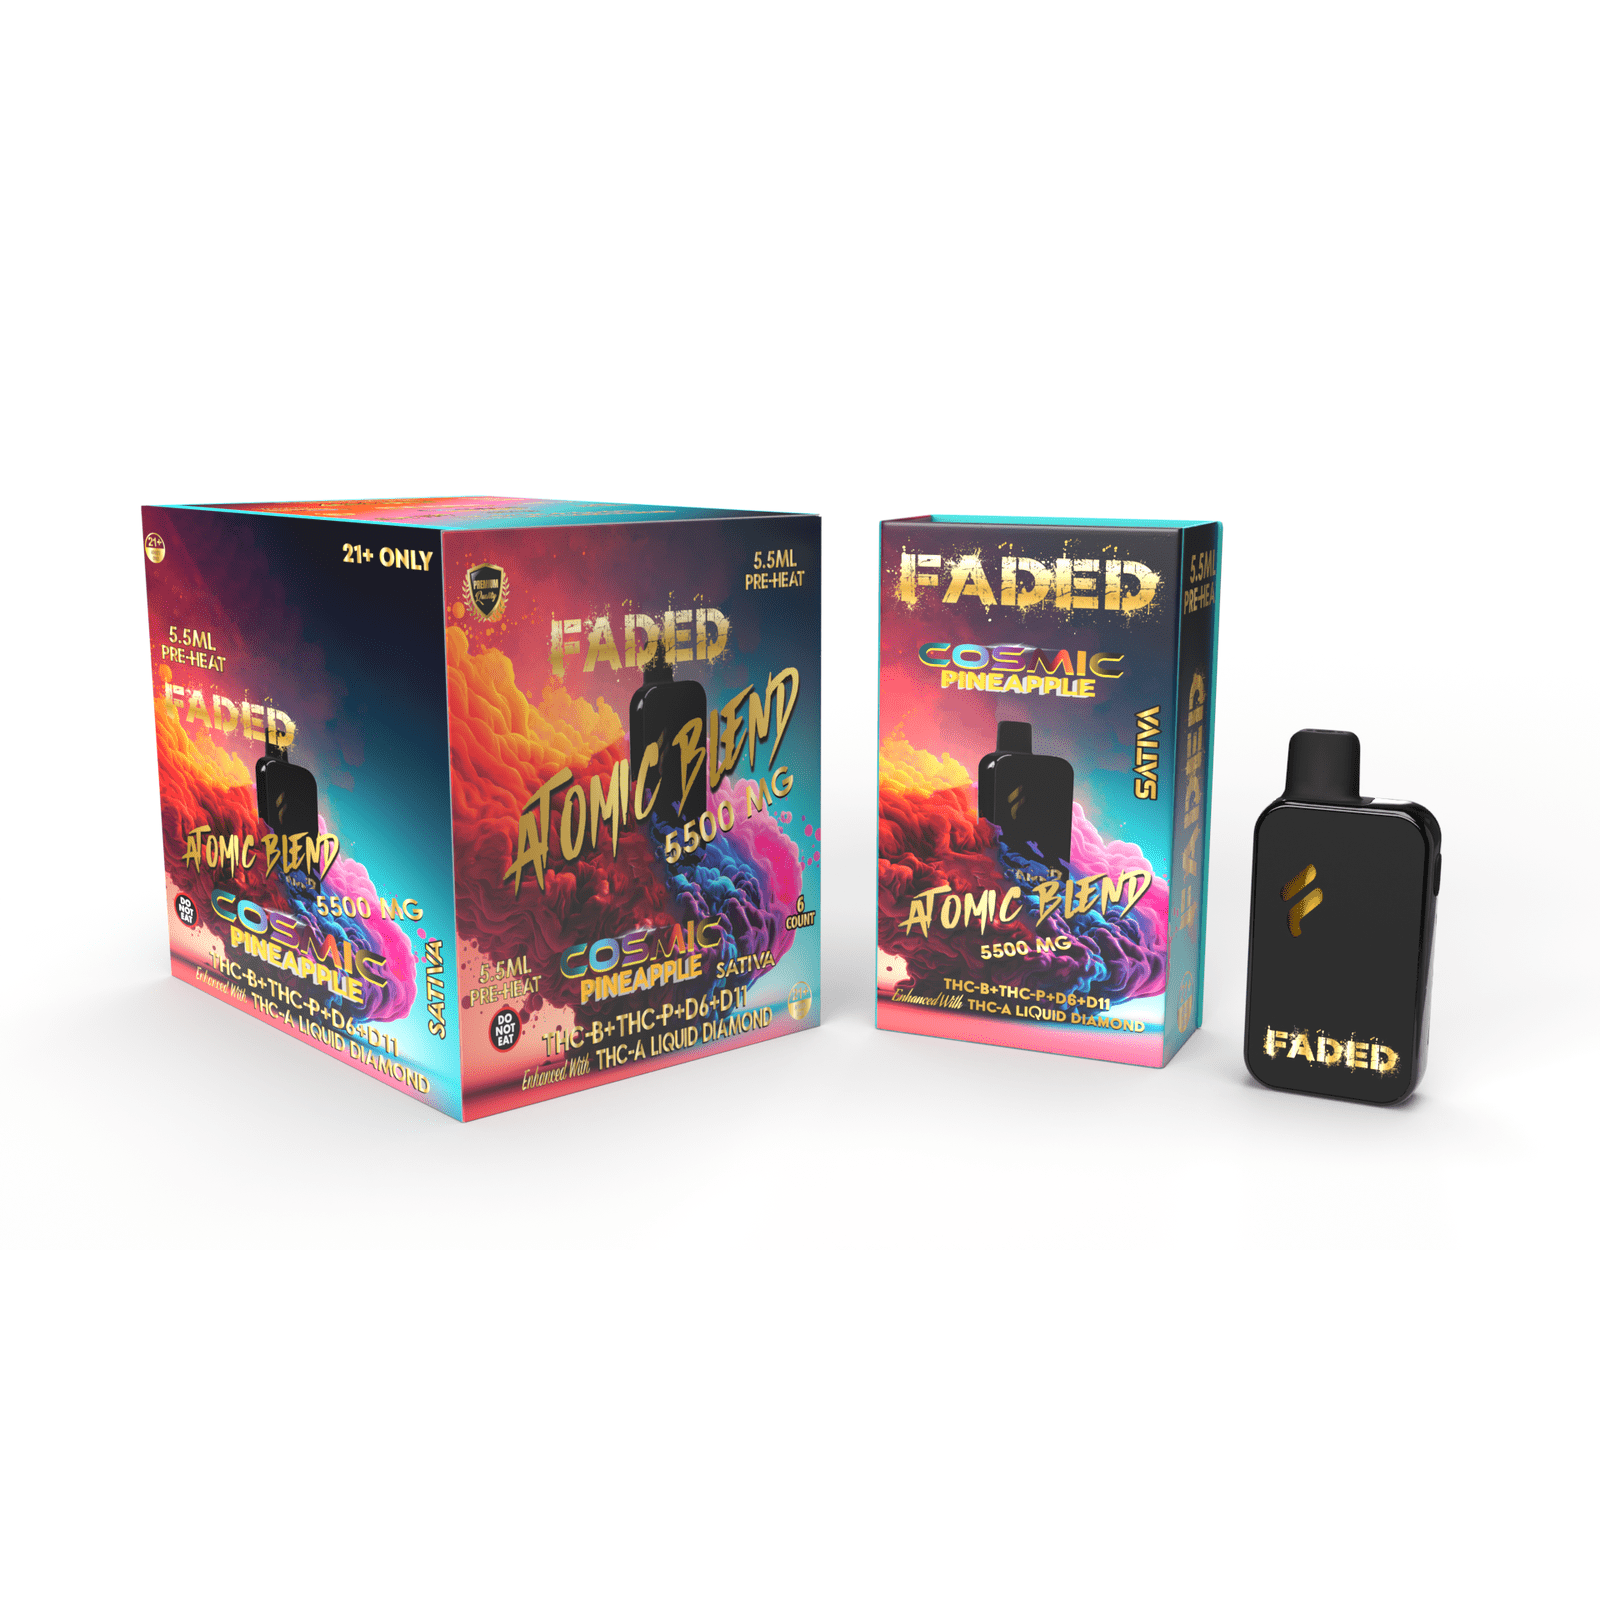 FADED THC-B+THC-P+D6+D11 ENHANCED WITH THC-A LIQUID DIAMOND RECHARGEABLE DISPOSABLE - SATIVA COSMIC PINEAPPLE 5.5ML